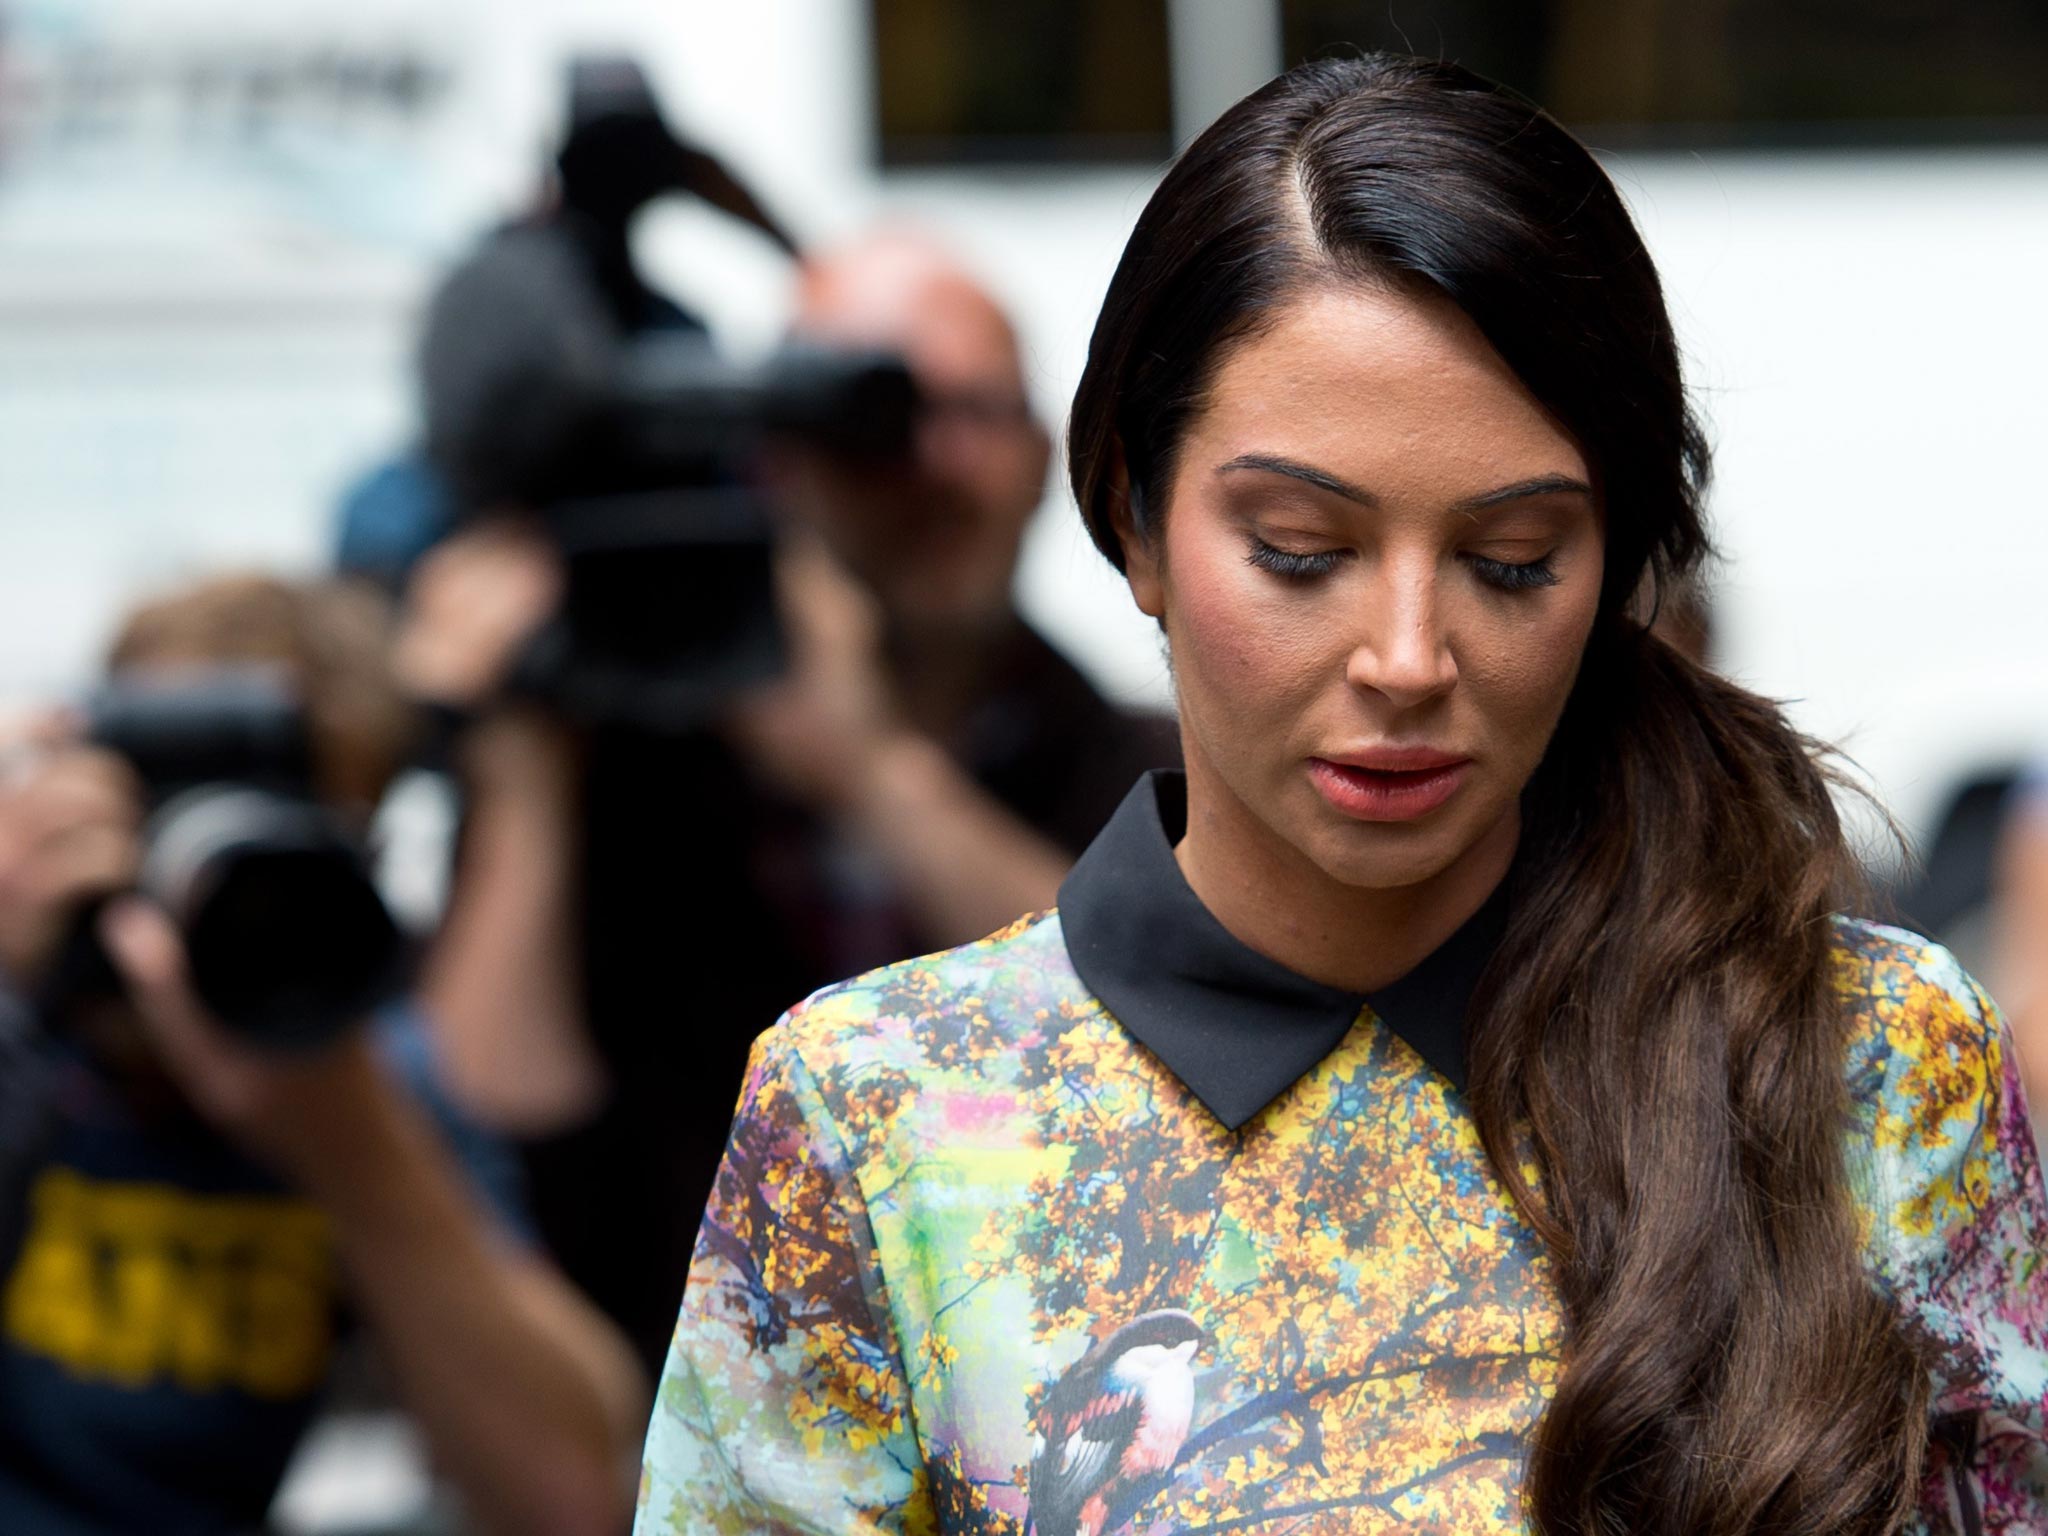 Tulisa Contostavlos arrives to face drug charges at Southwark Crown